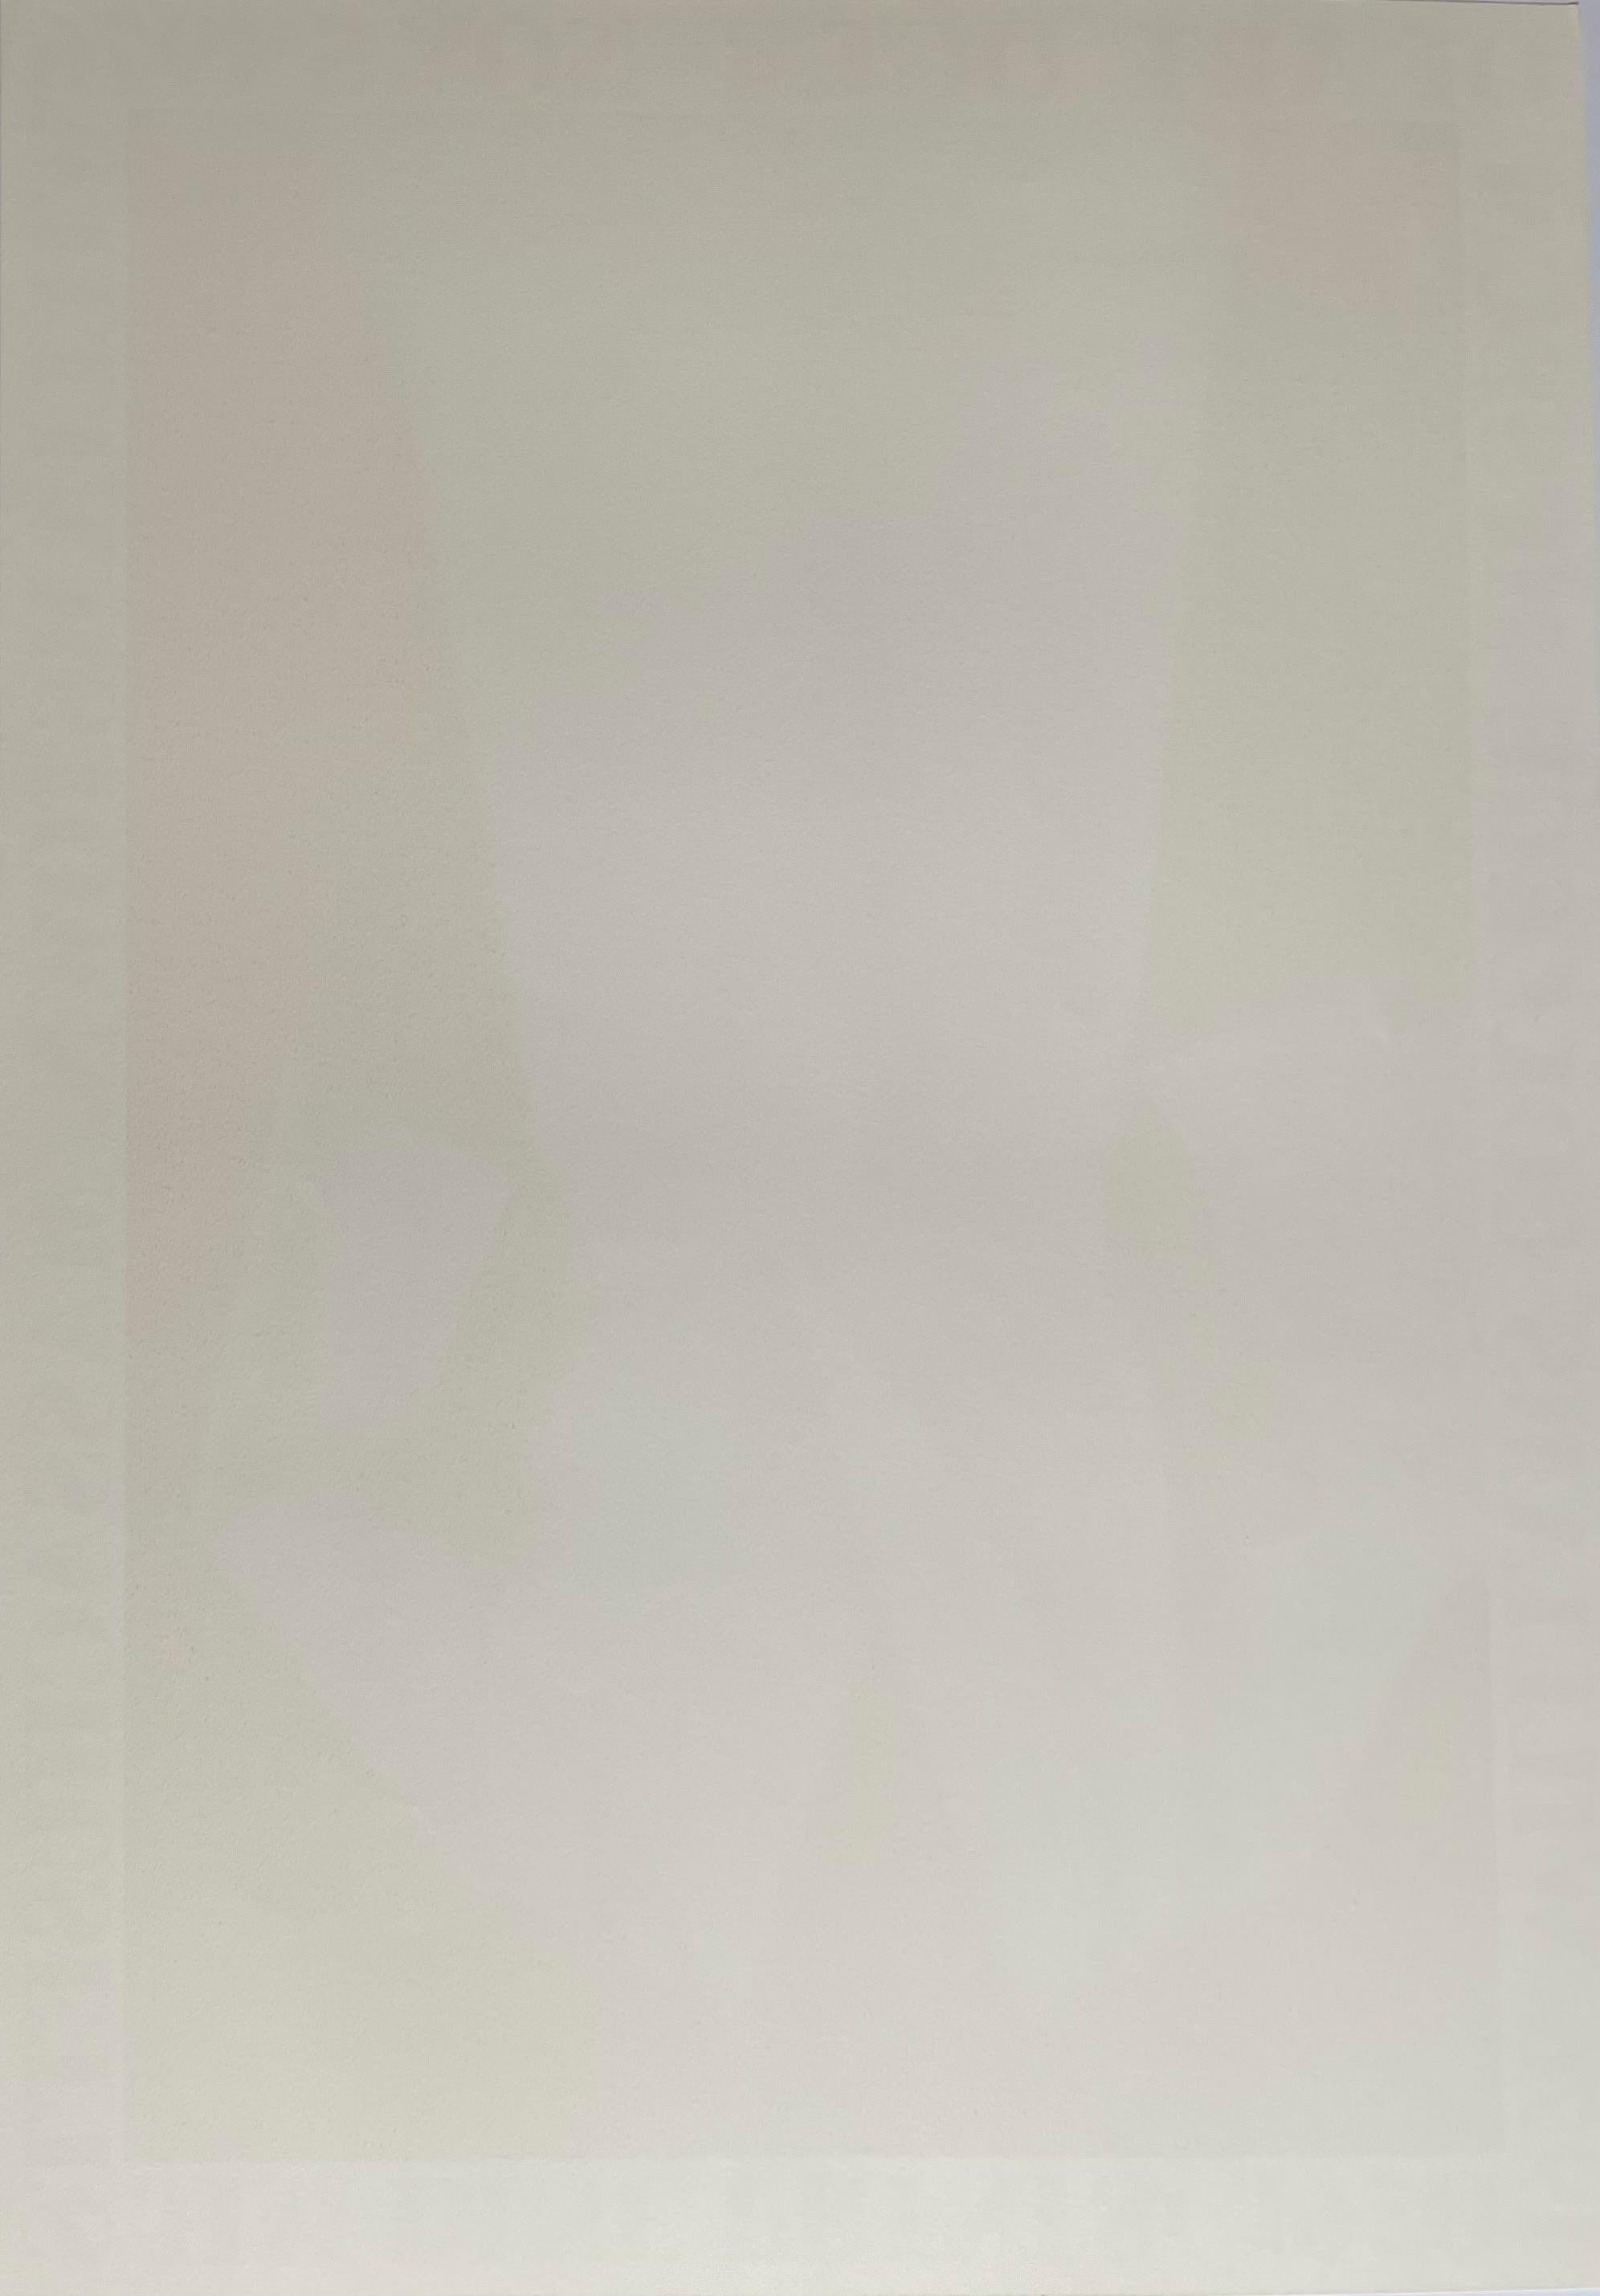 Jim Dine
Limited Edition Williams College Museum Poster, 1976
Offset lithograph poster on off white wove paper
Limited edition of 300 
Published by Pace Editions, with copyright
LARGE: 37 x 22 inches
(this work ships rolled in a tube measuring 36